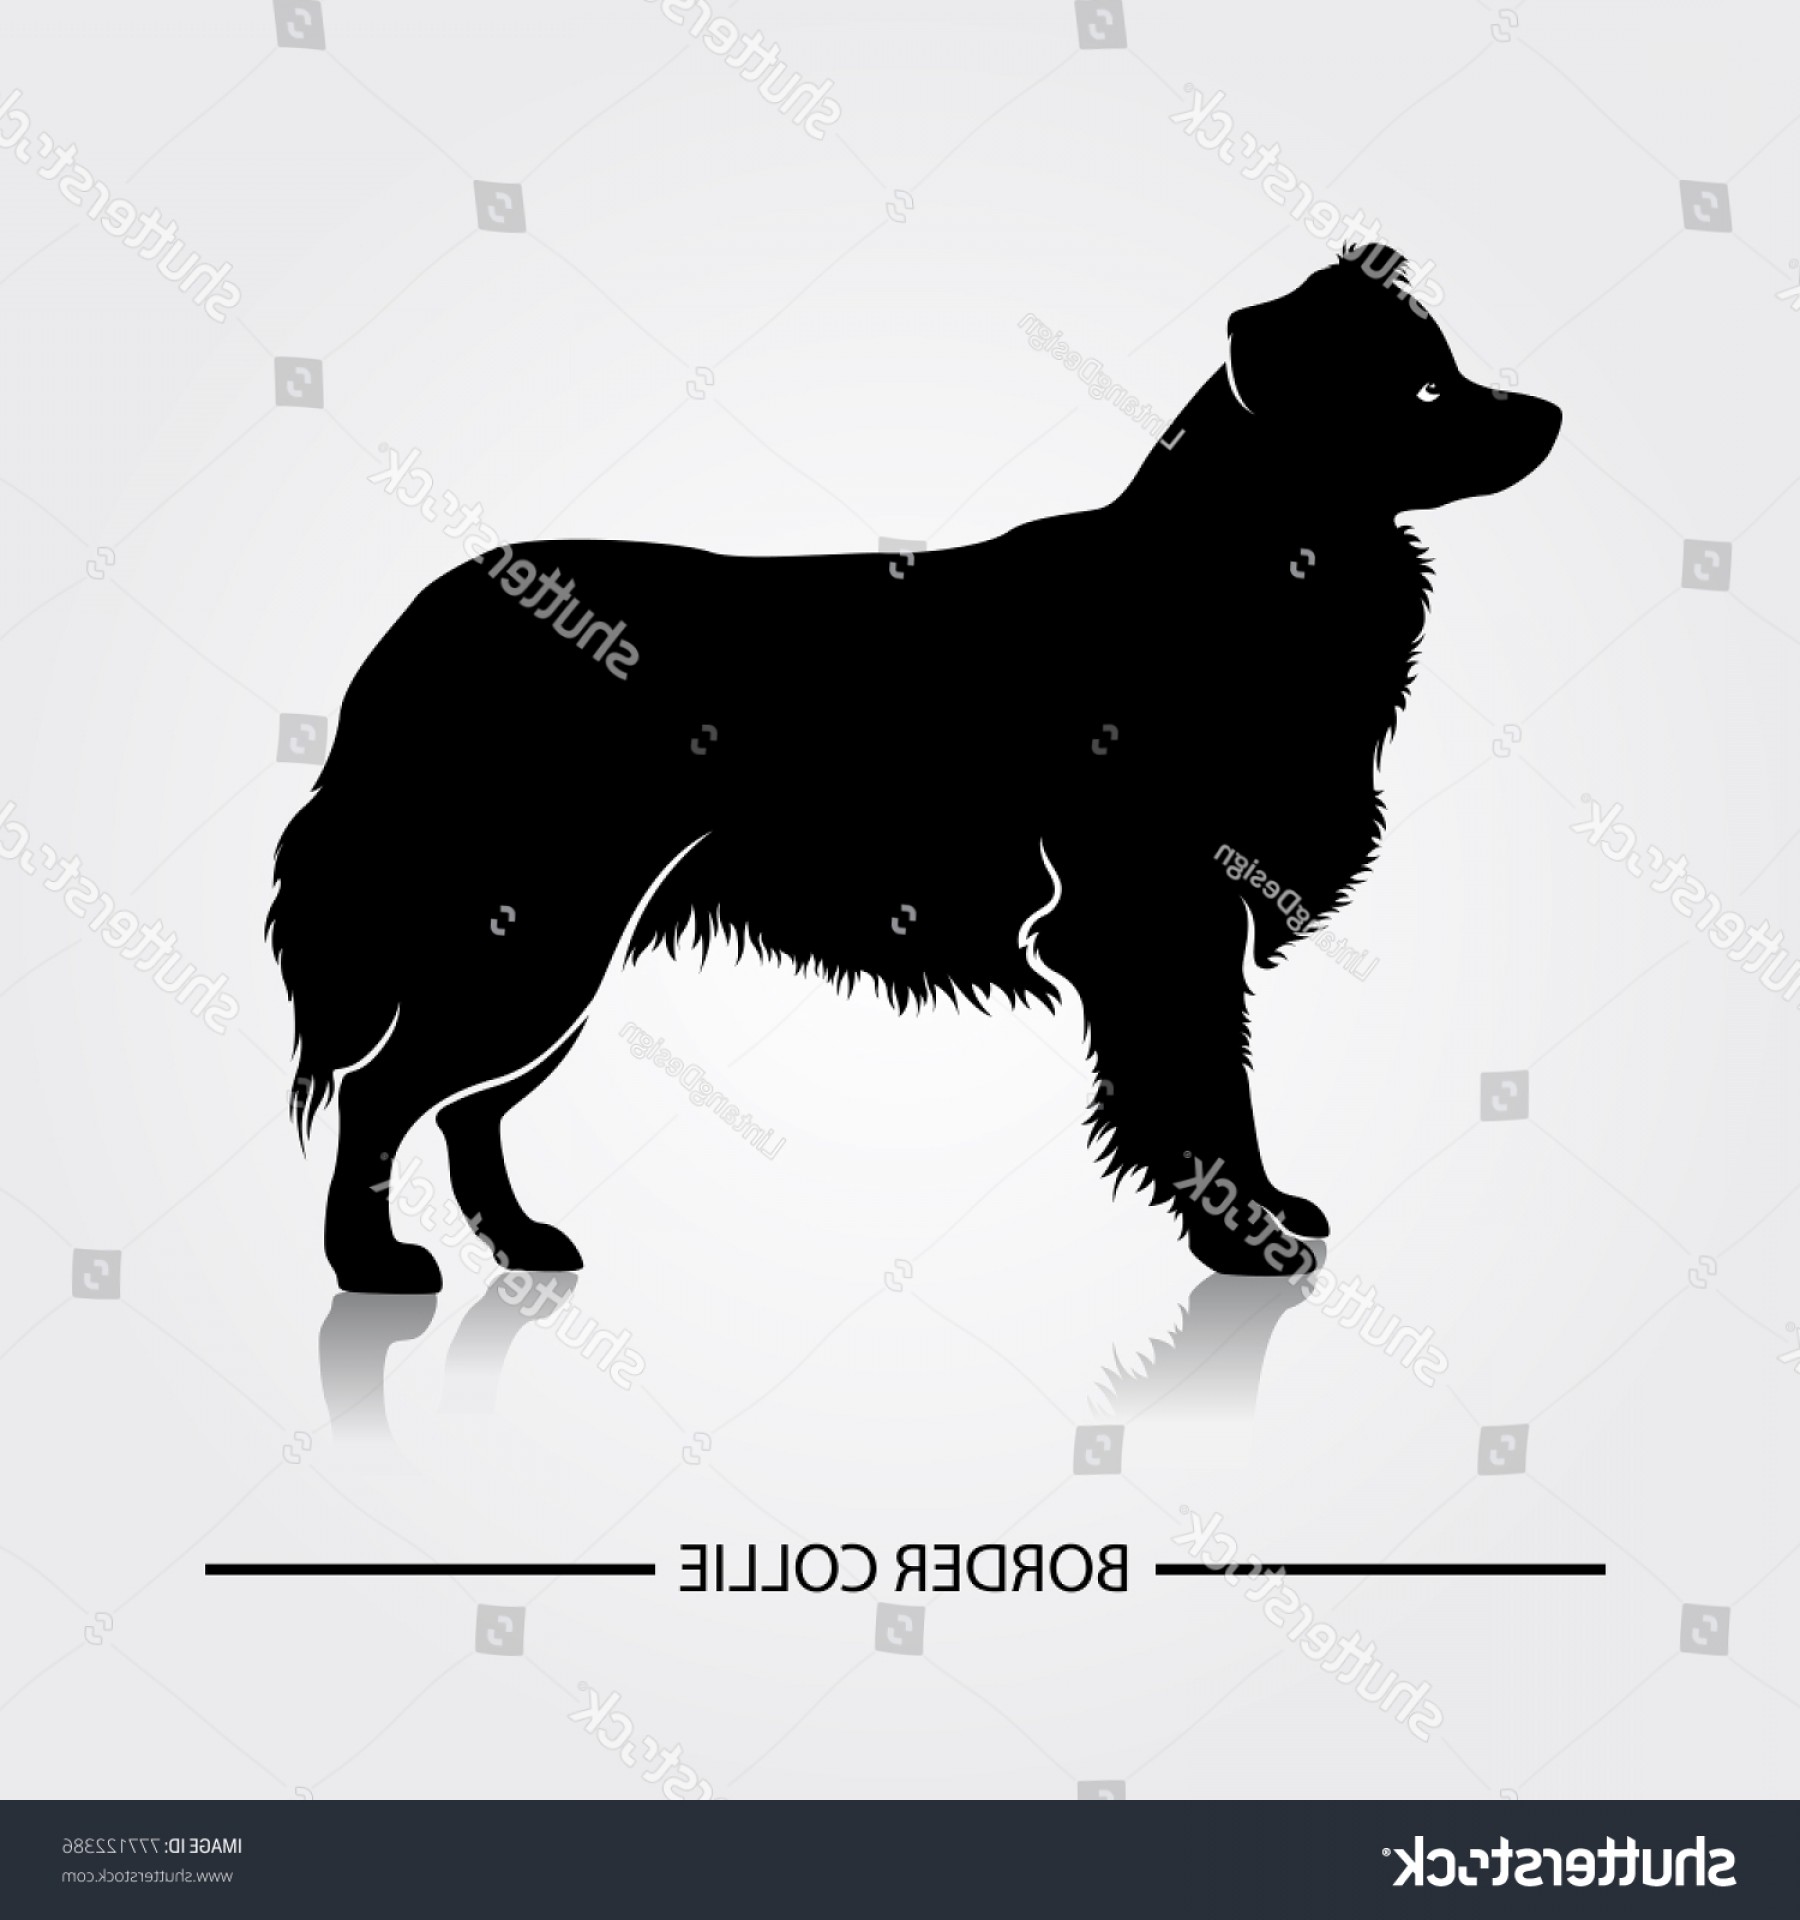 Download Border Collie Silhouette Vector at Vectorified.com ...